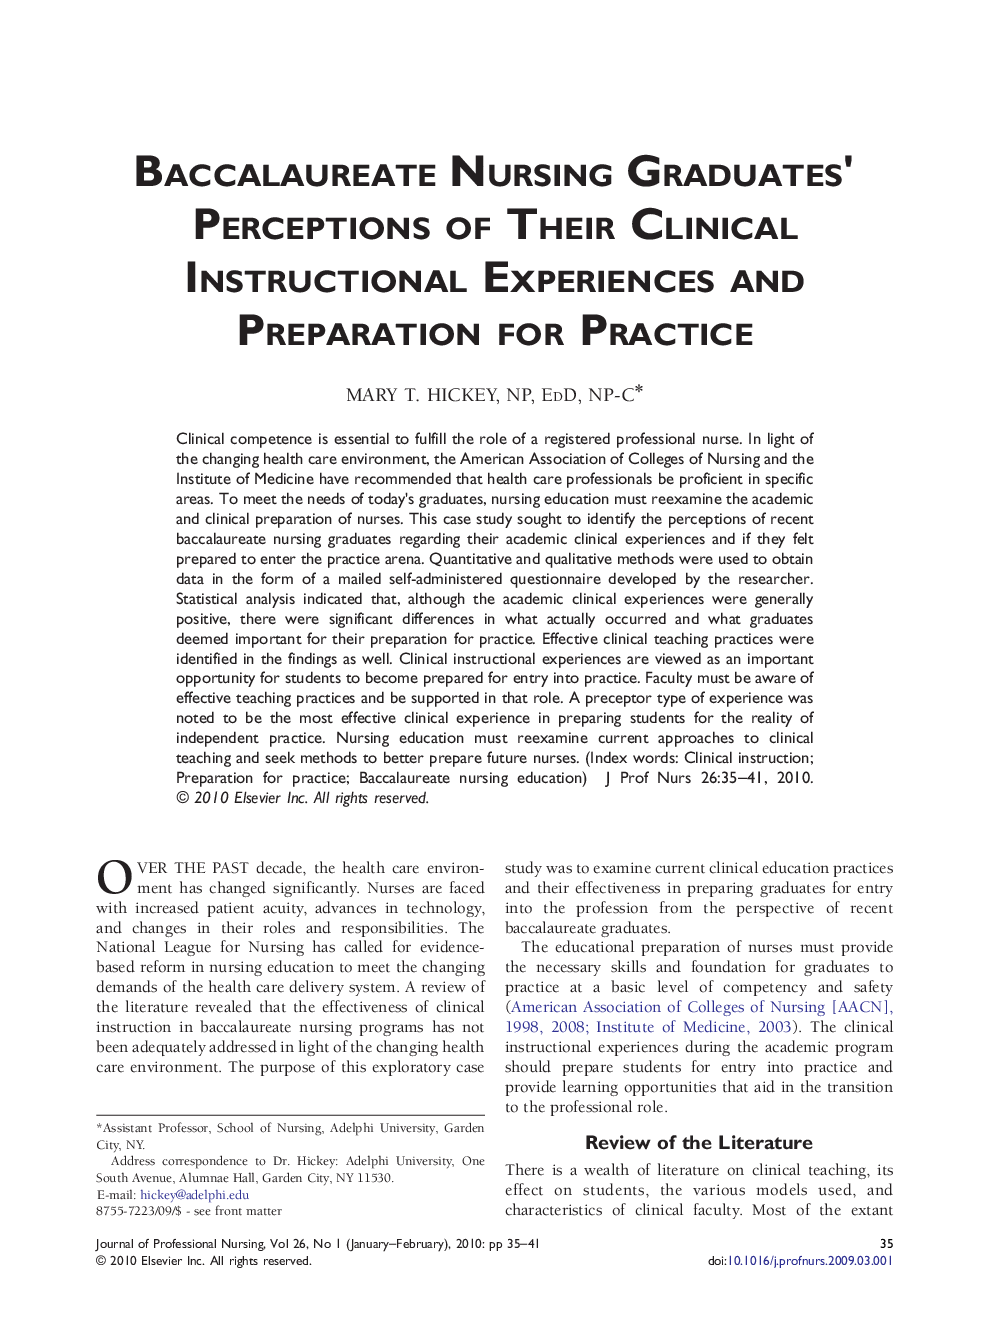 Baccalaureate Nursing Graduates' Perceptions of Their Clinical Instructional Experiences and Preparation for Practice